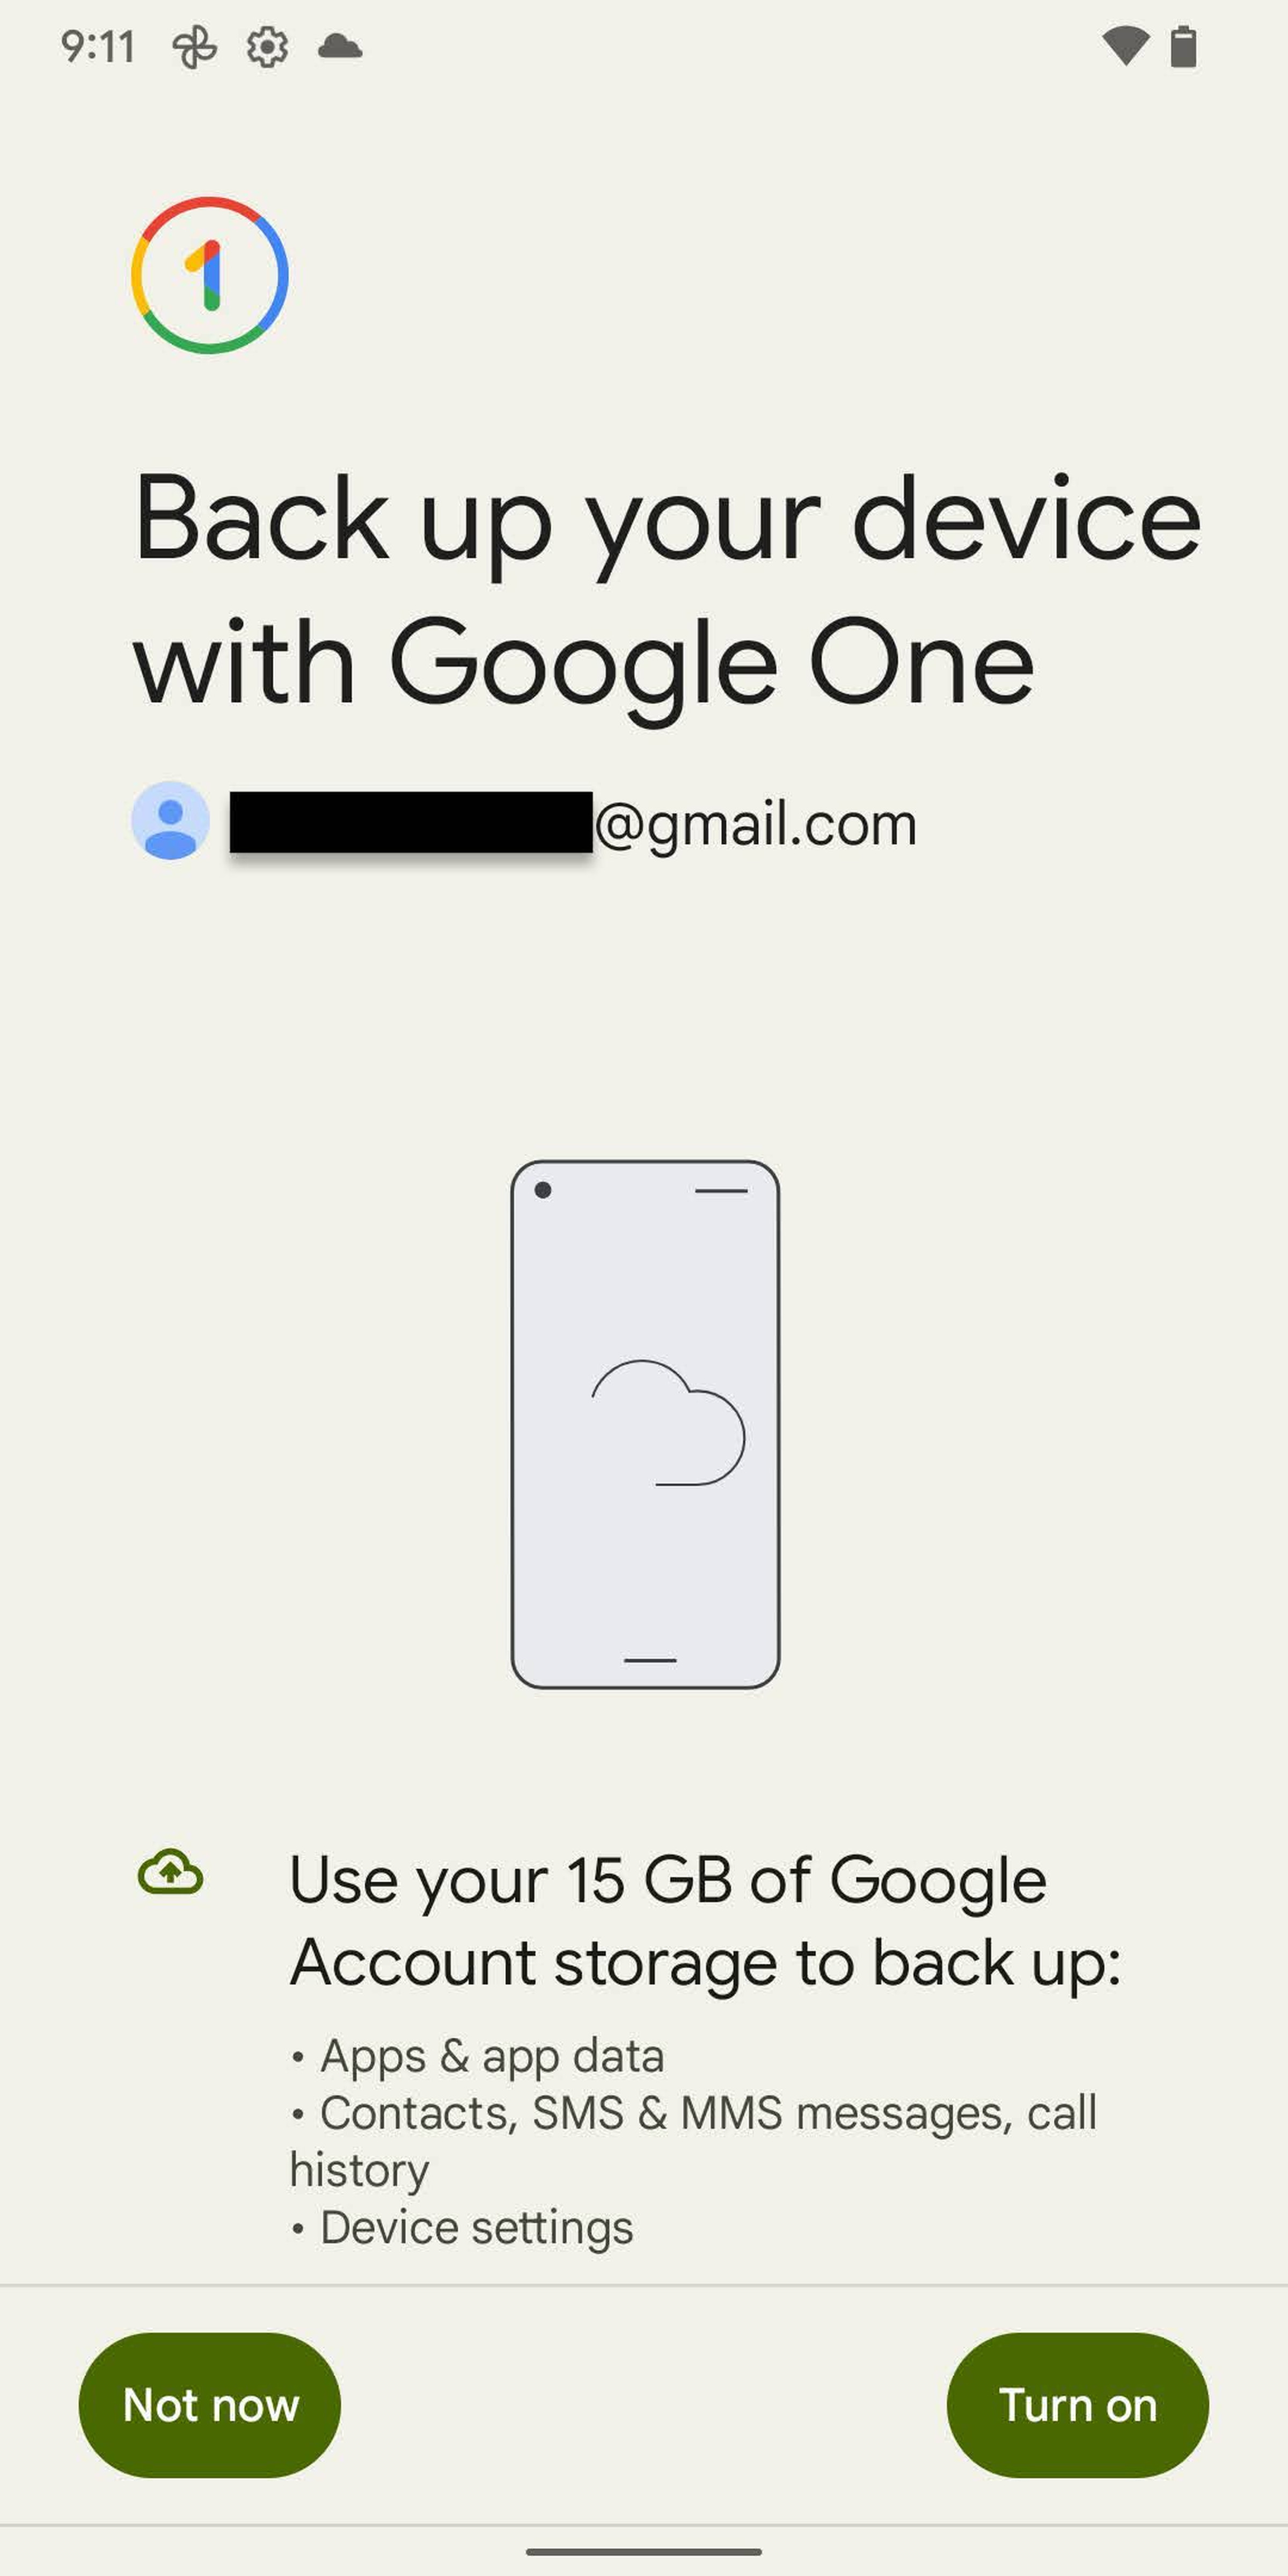 Page: Back up your device with Google One